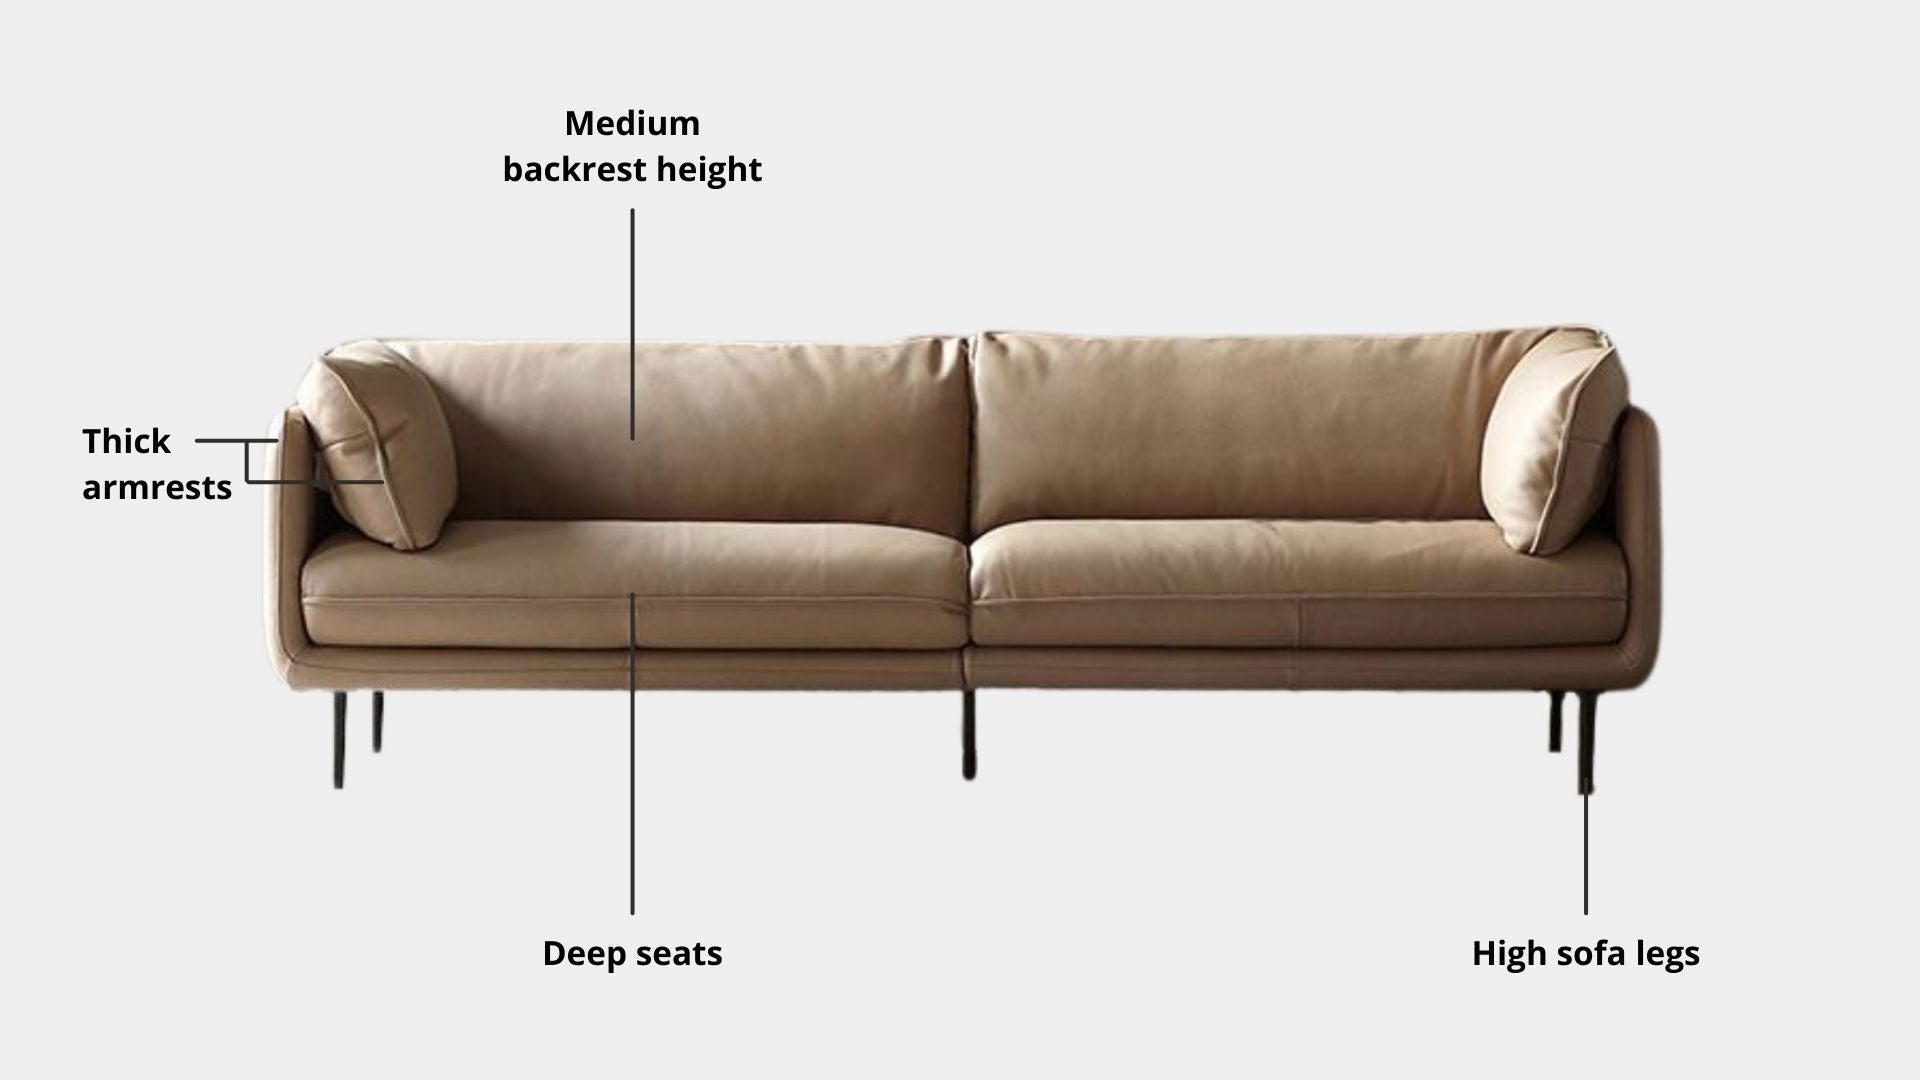 Key features such as armrest thickness, cushion height, seat depth and sofa leg height for Cuddle Full Leather Sofa